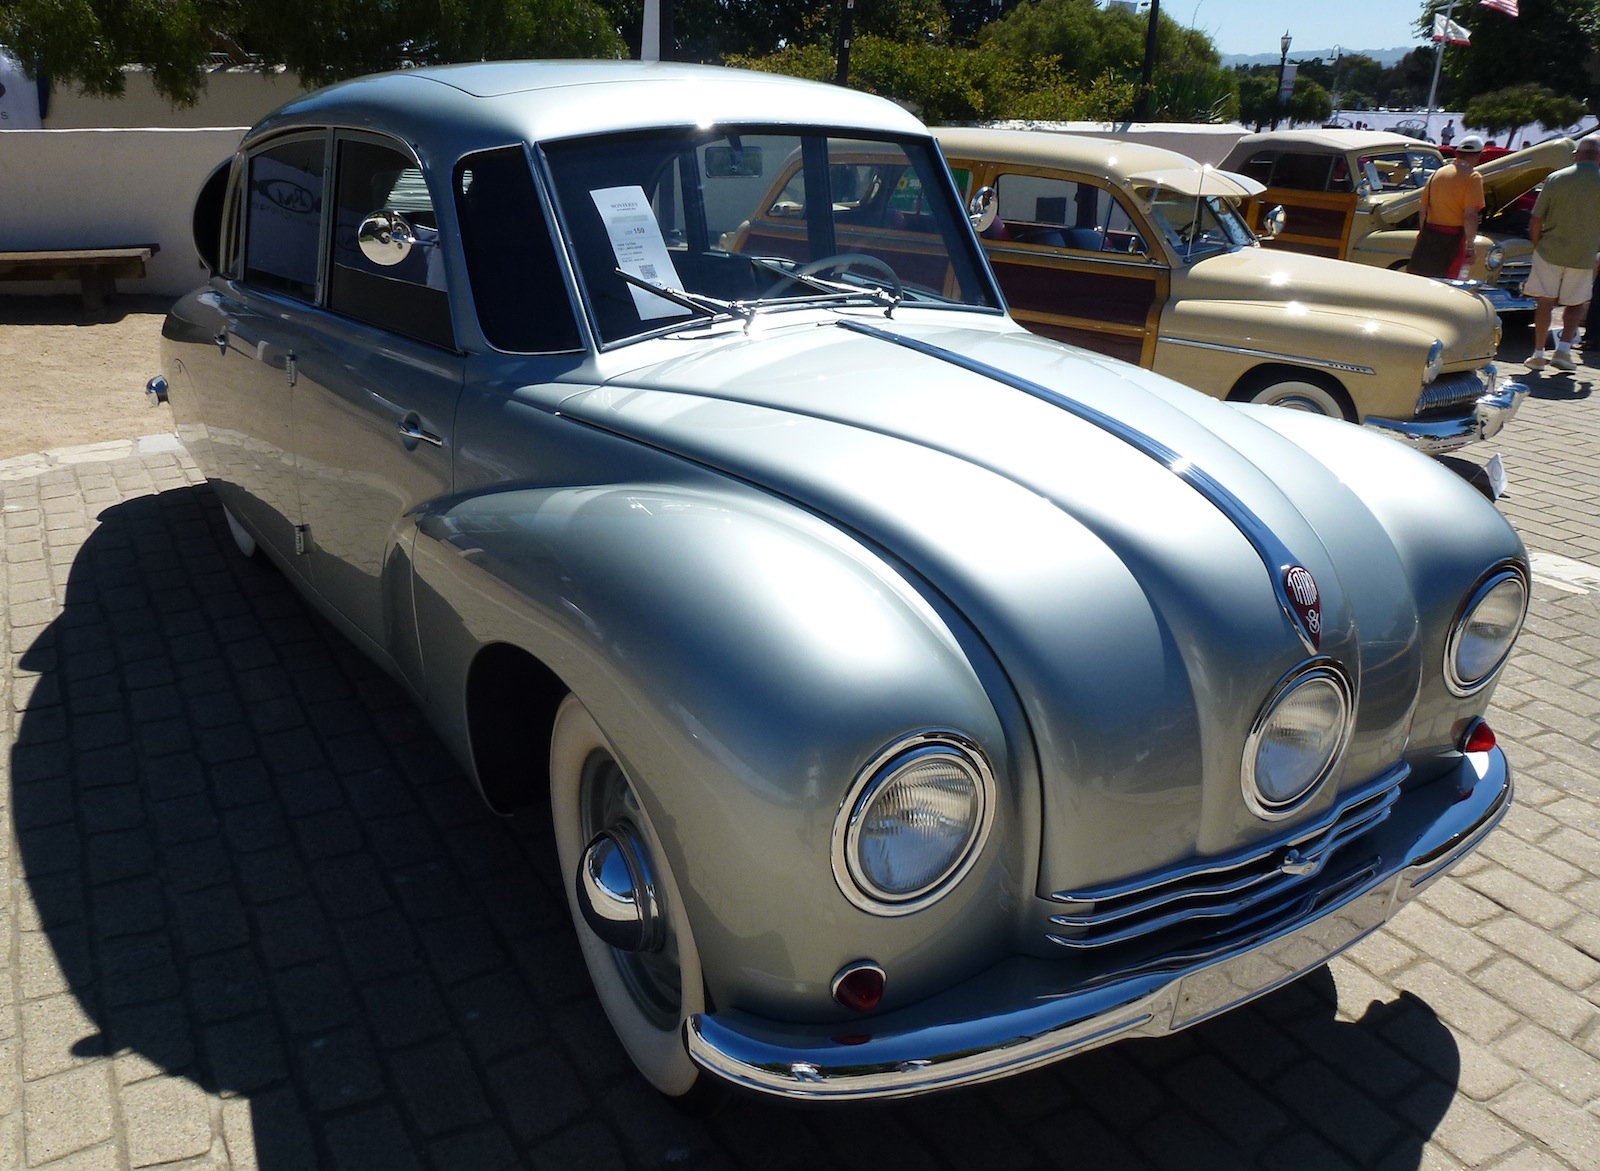 1948 Tatra T87 Limousine - Sold At Auction In Monterey